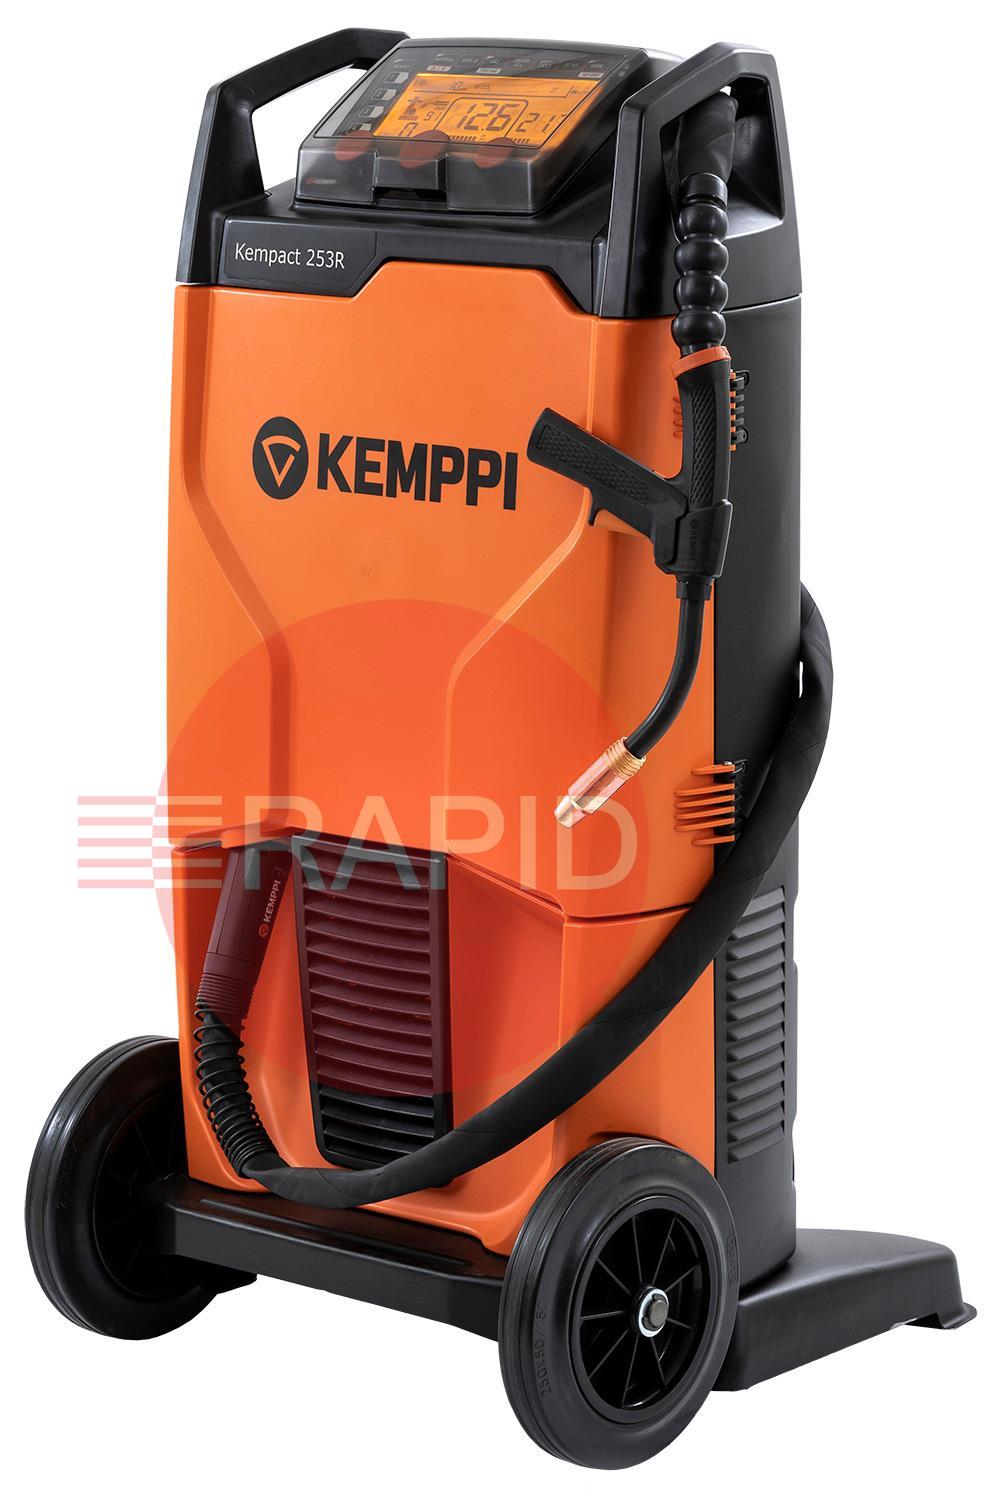 P2226GXE  Kemppi Kempact RA 253R, 250A 3 Phase 400v Mig Welder, with Flexlite GXe 405G 5m Torch